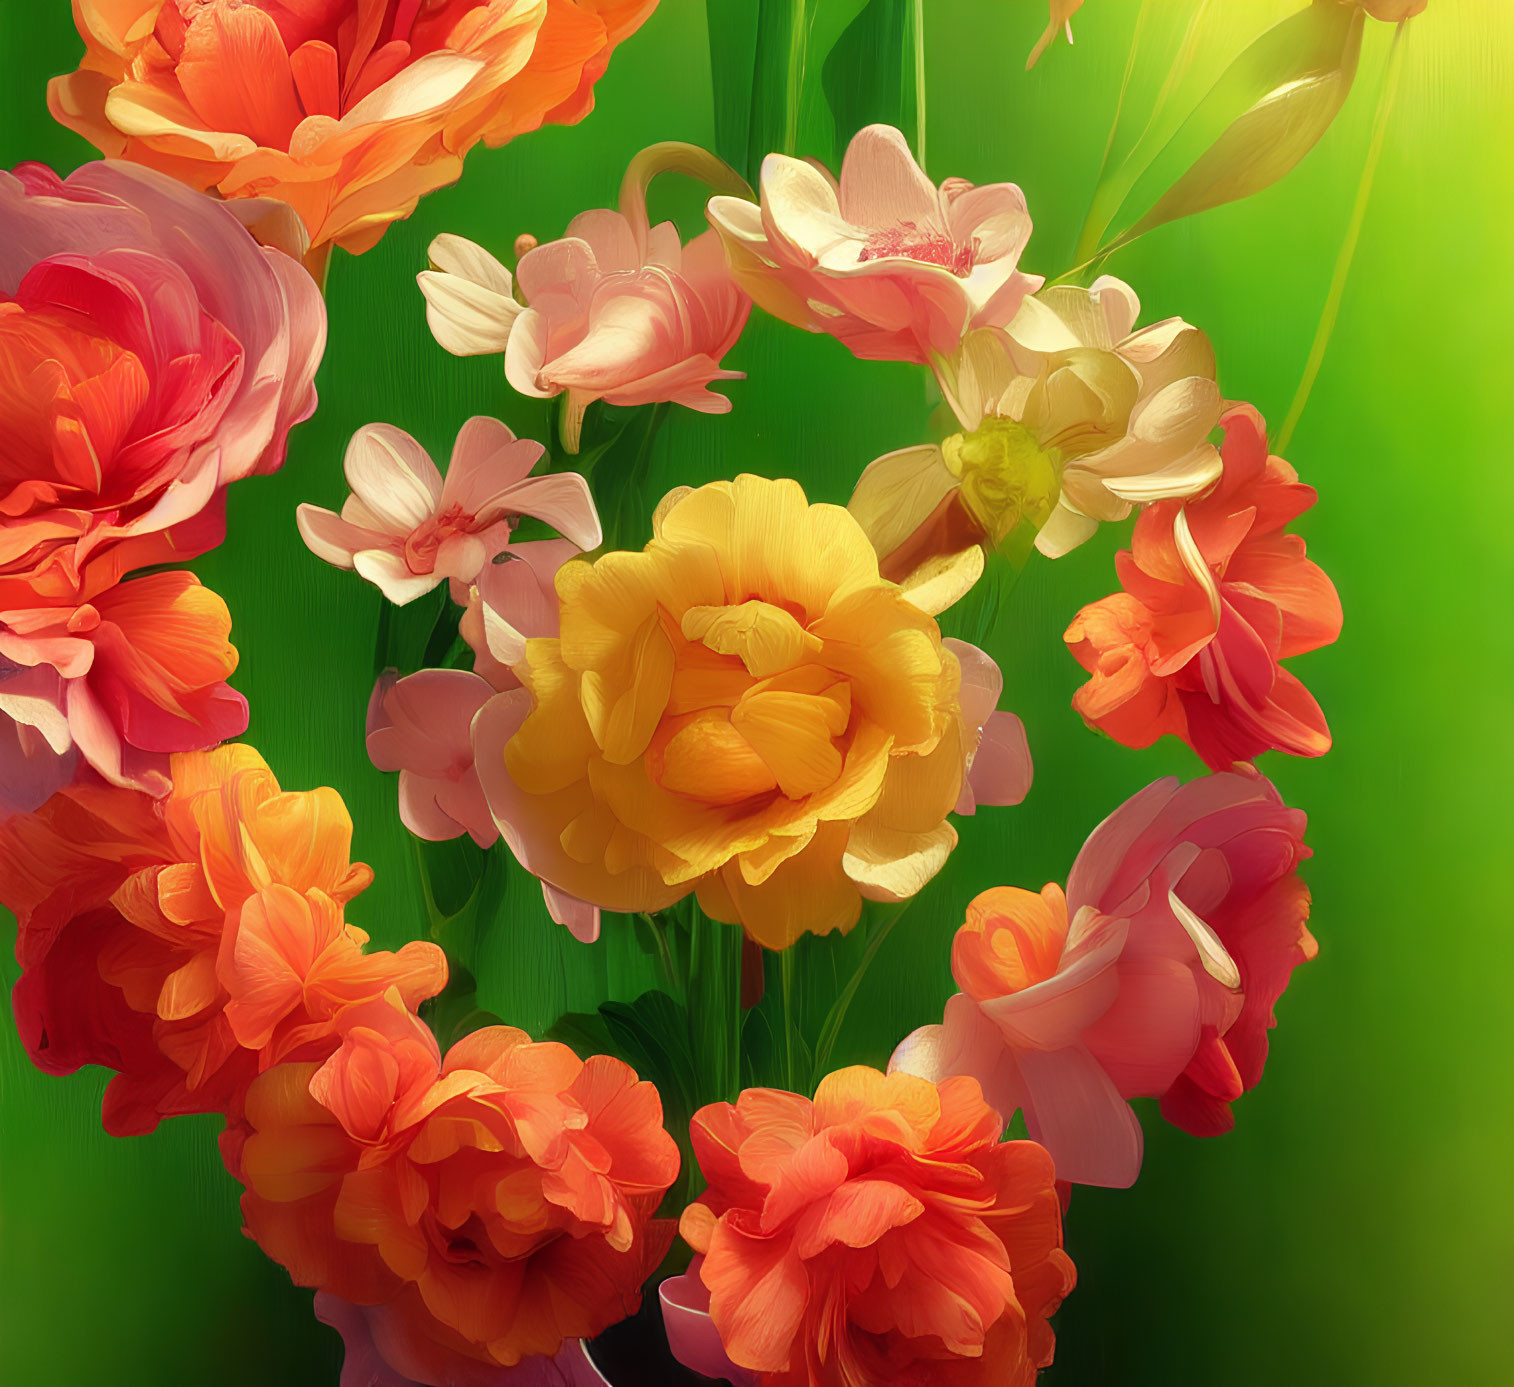 Colorful Bouquet of Orange, Pink, and Yellow Flowers on Green Background